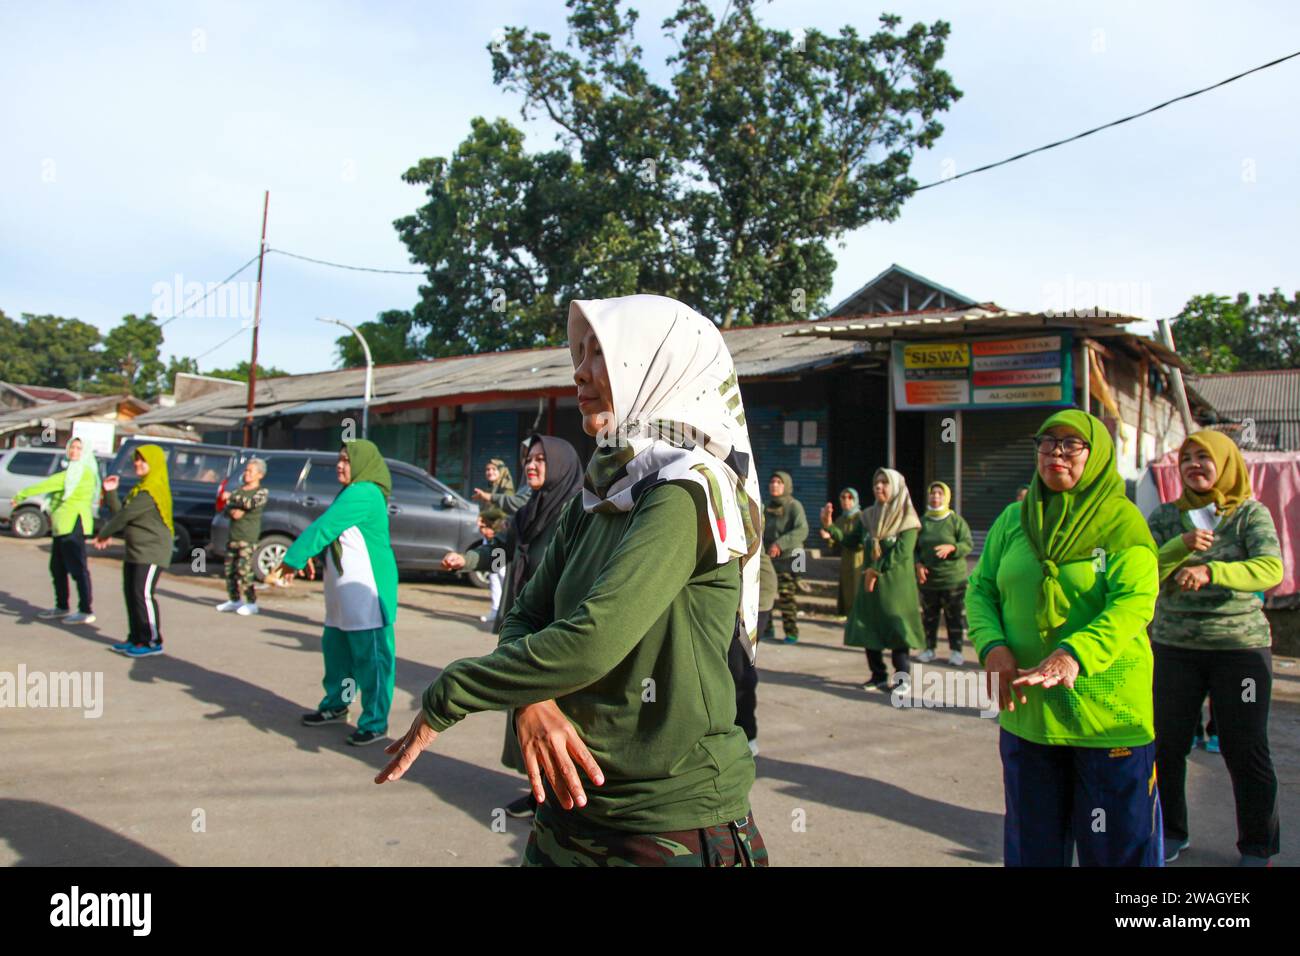 Muslim Women doing early morning Aerobics. The women are mostly middle-aged and wearing military fatigues. Stock Photo